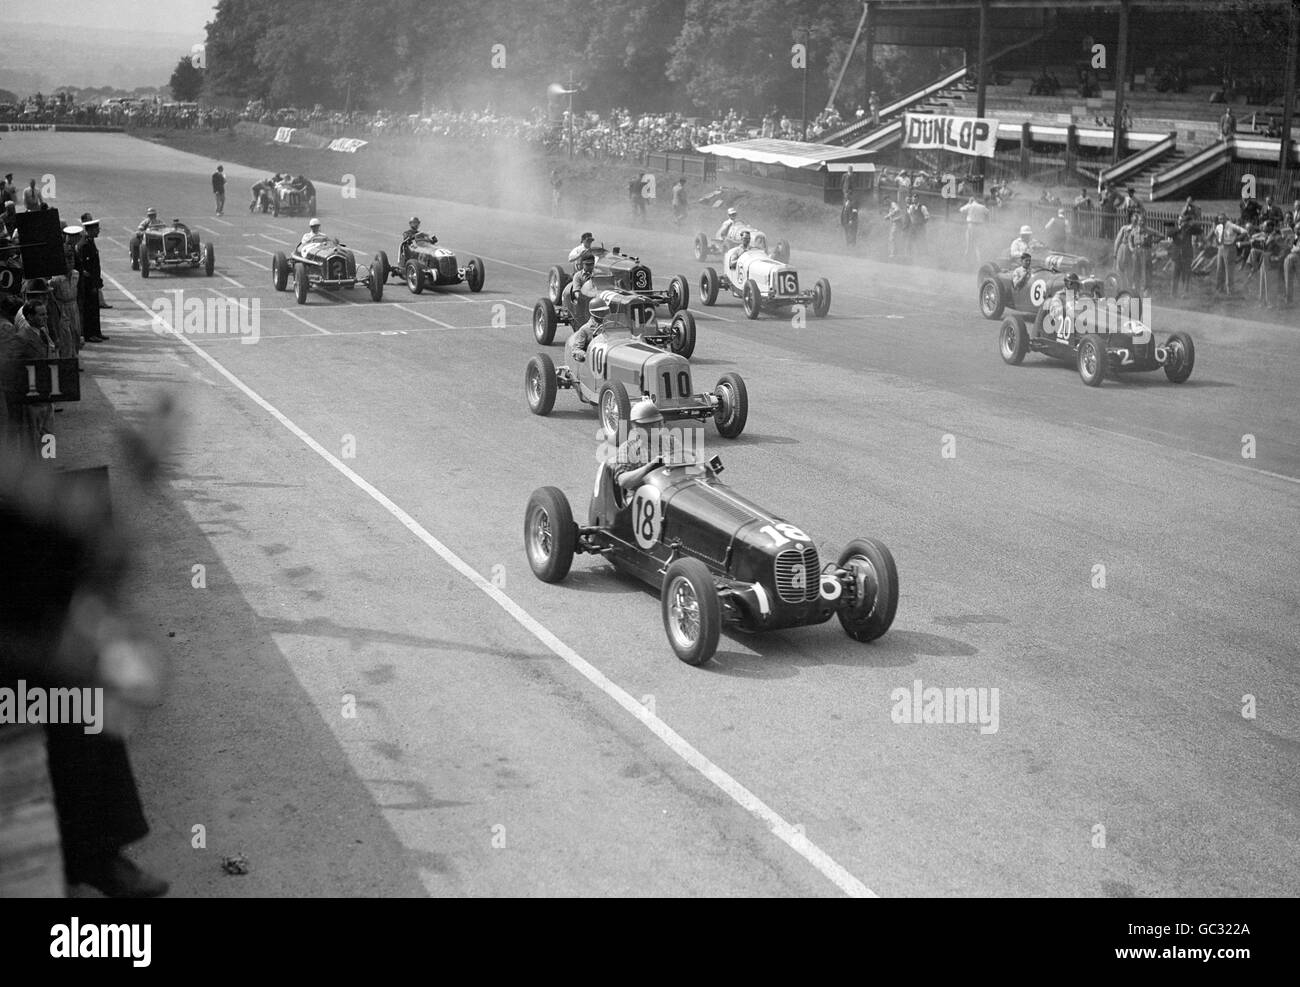 The 200 Mile Race competitors jostle for position as the race kicks off at Donington Park Stock Photo